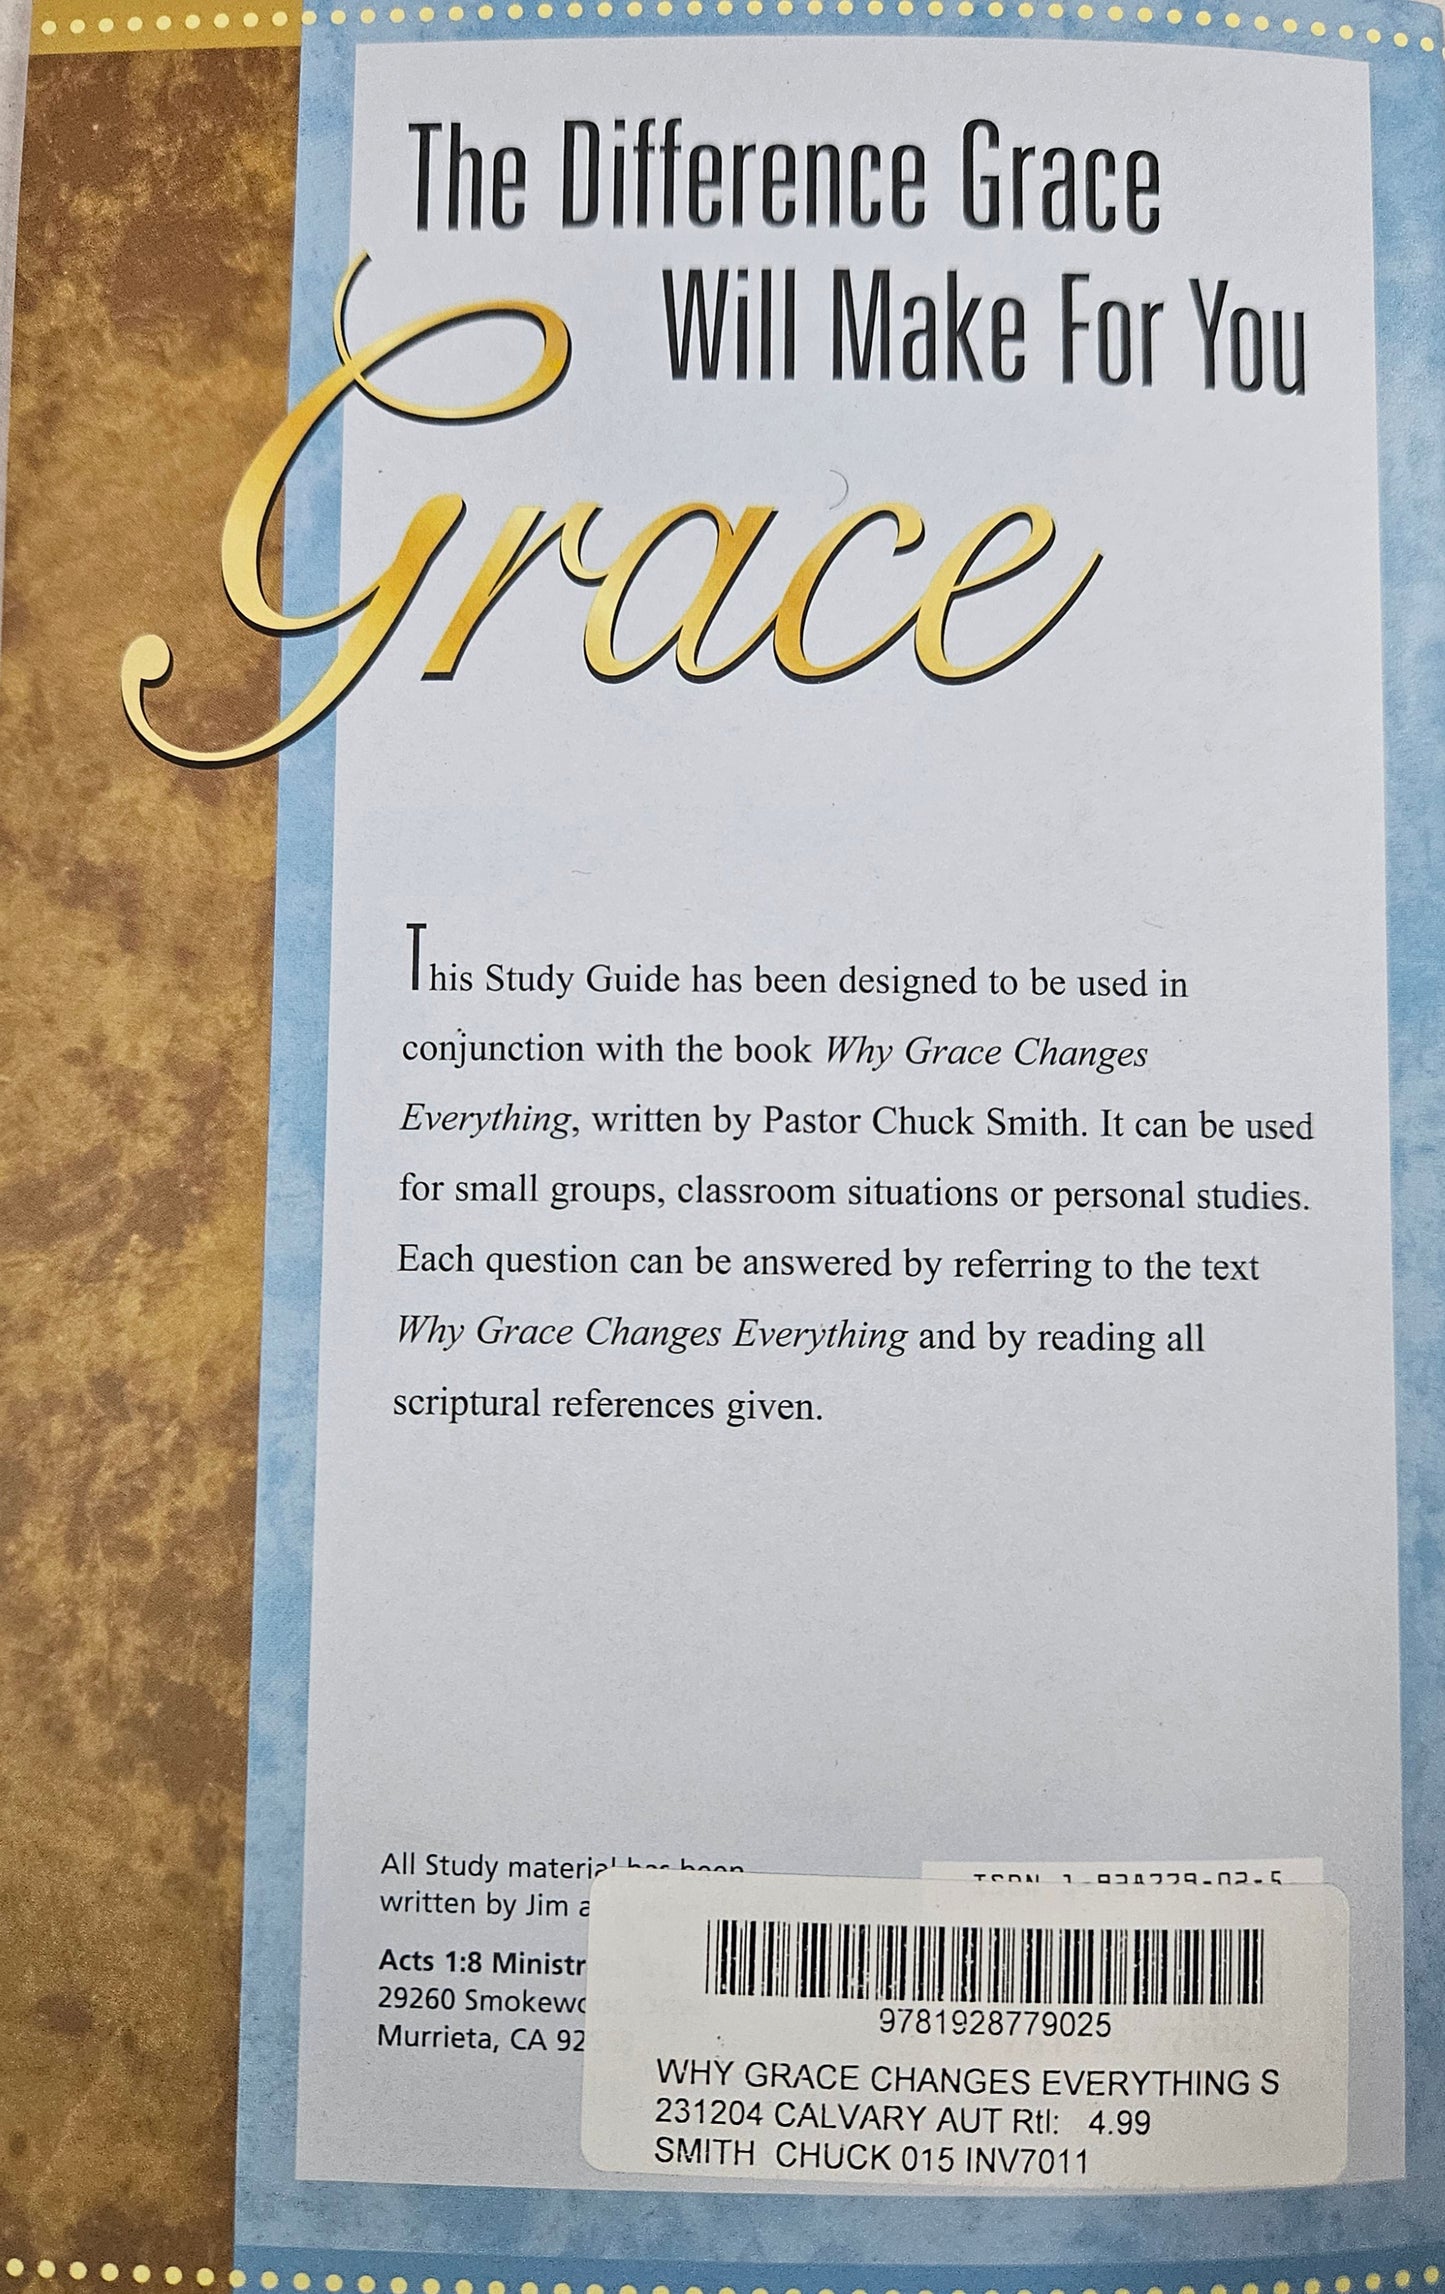 Why Grace Changes Everything Study Guide : Study Guide by Jim Hesterly and June Hesterly